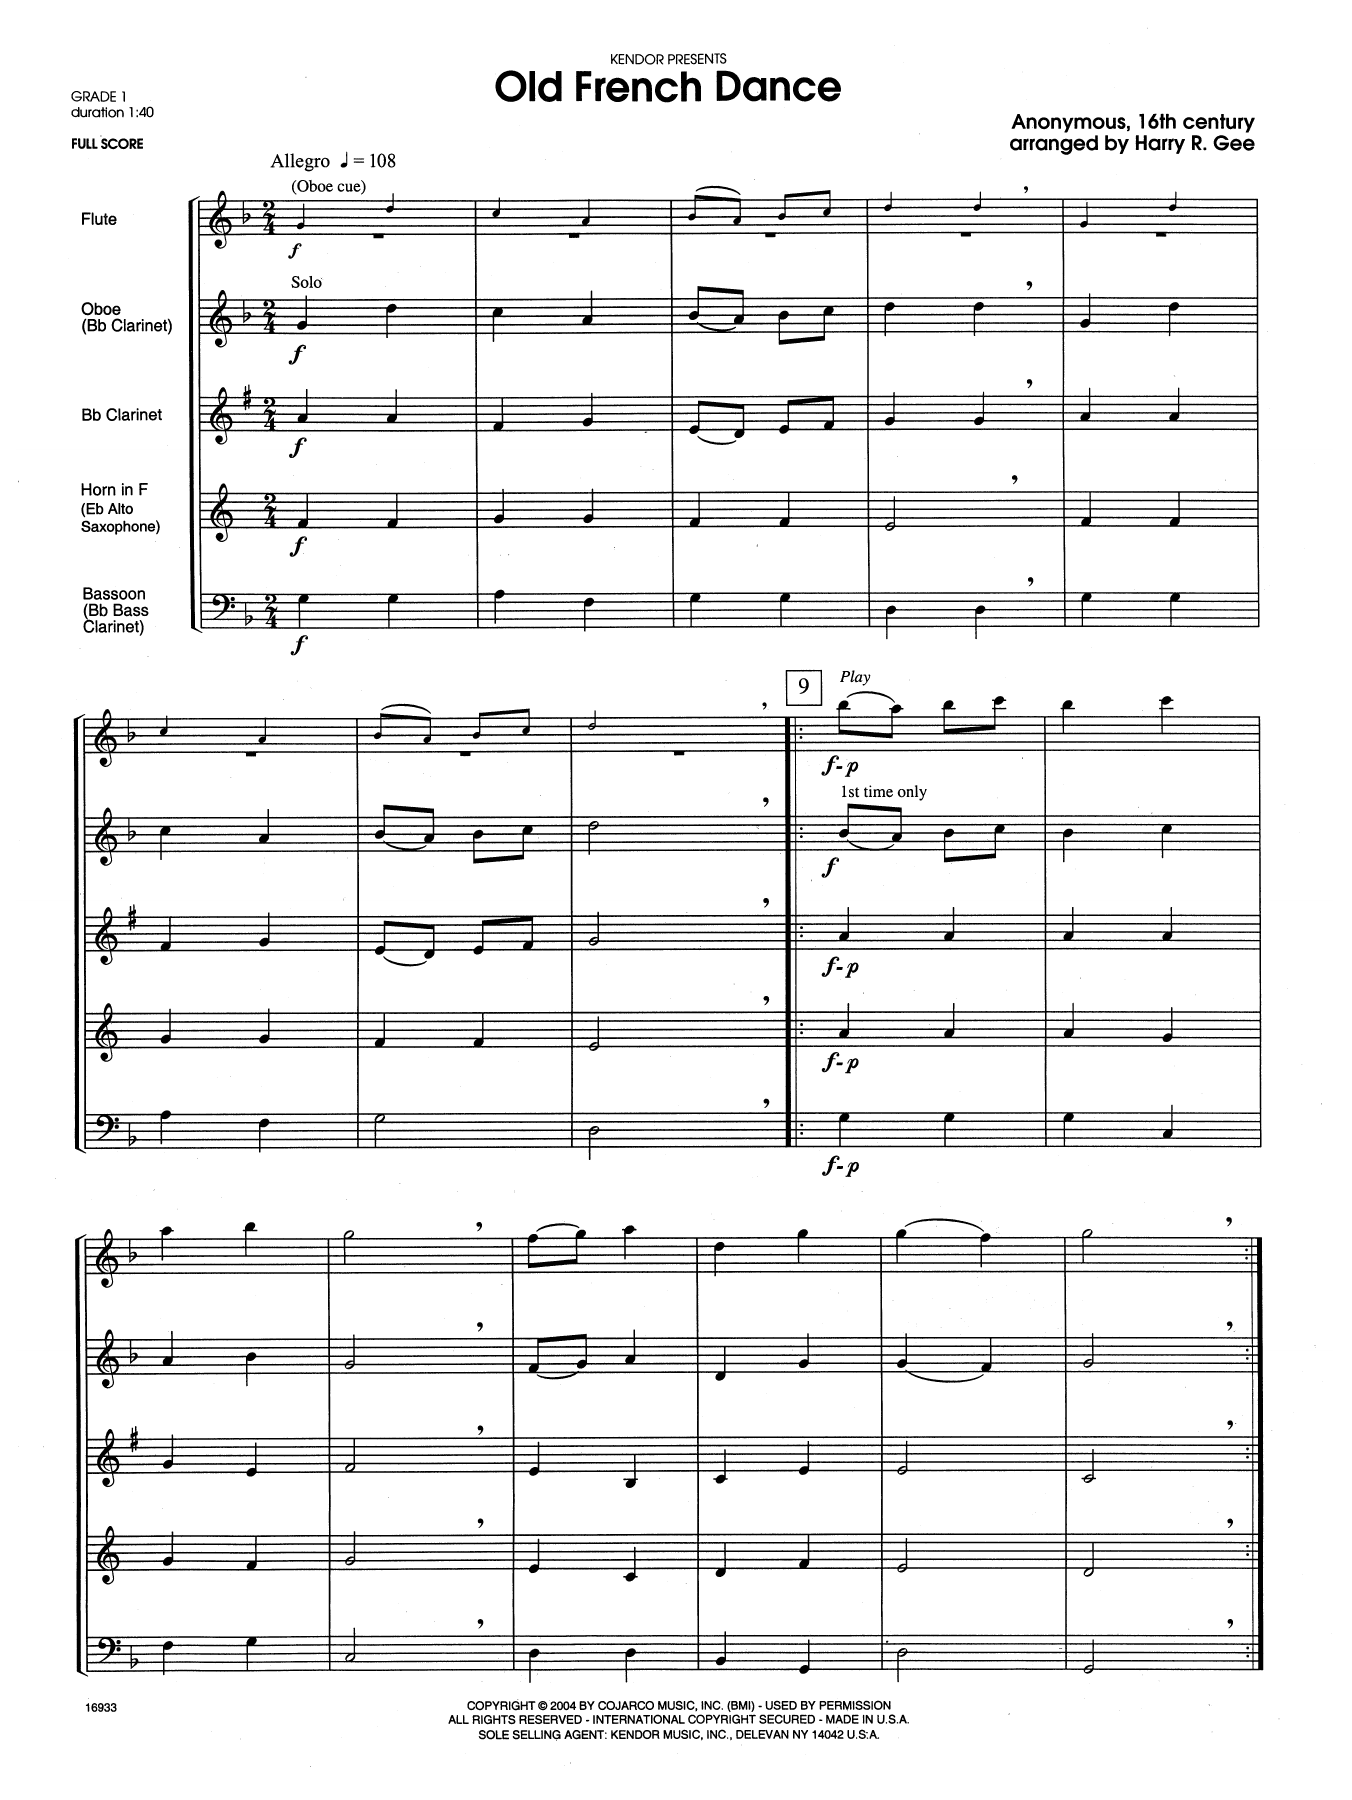 Download Harry R. Gee Old French Dance - Full Score Sheet Music